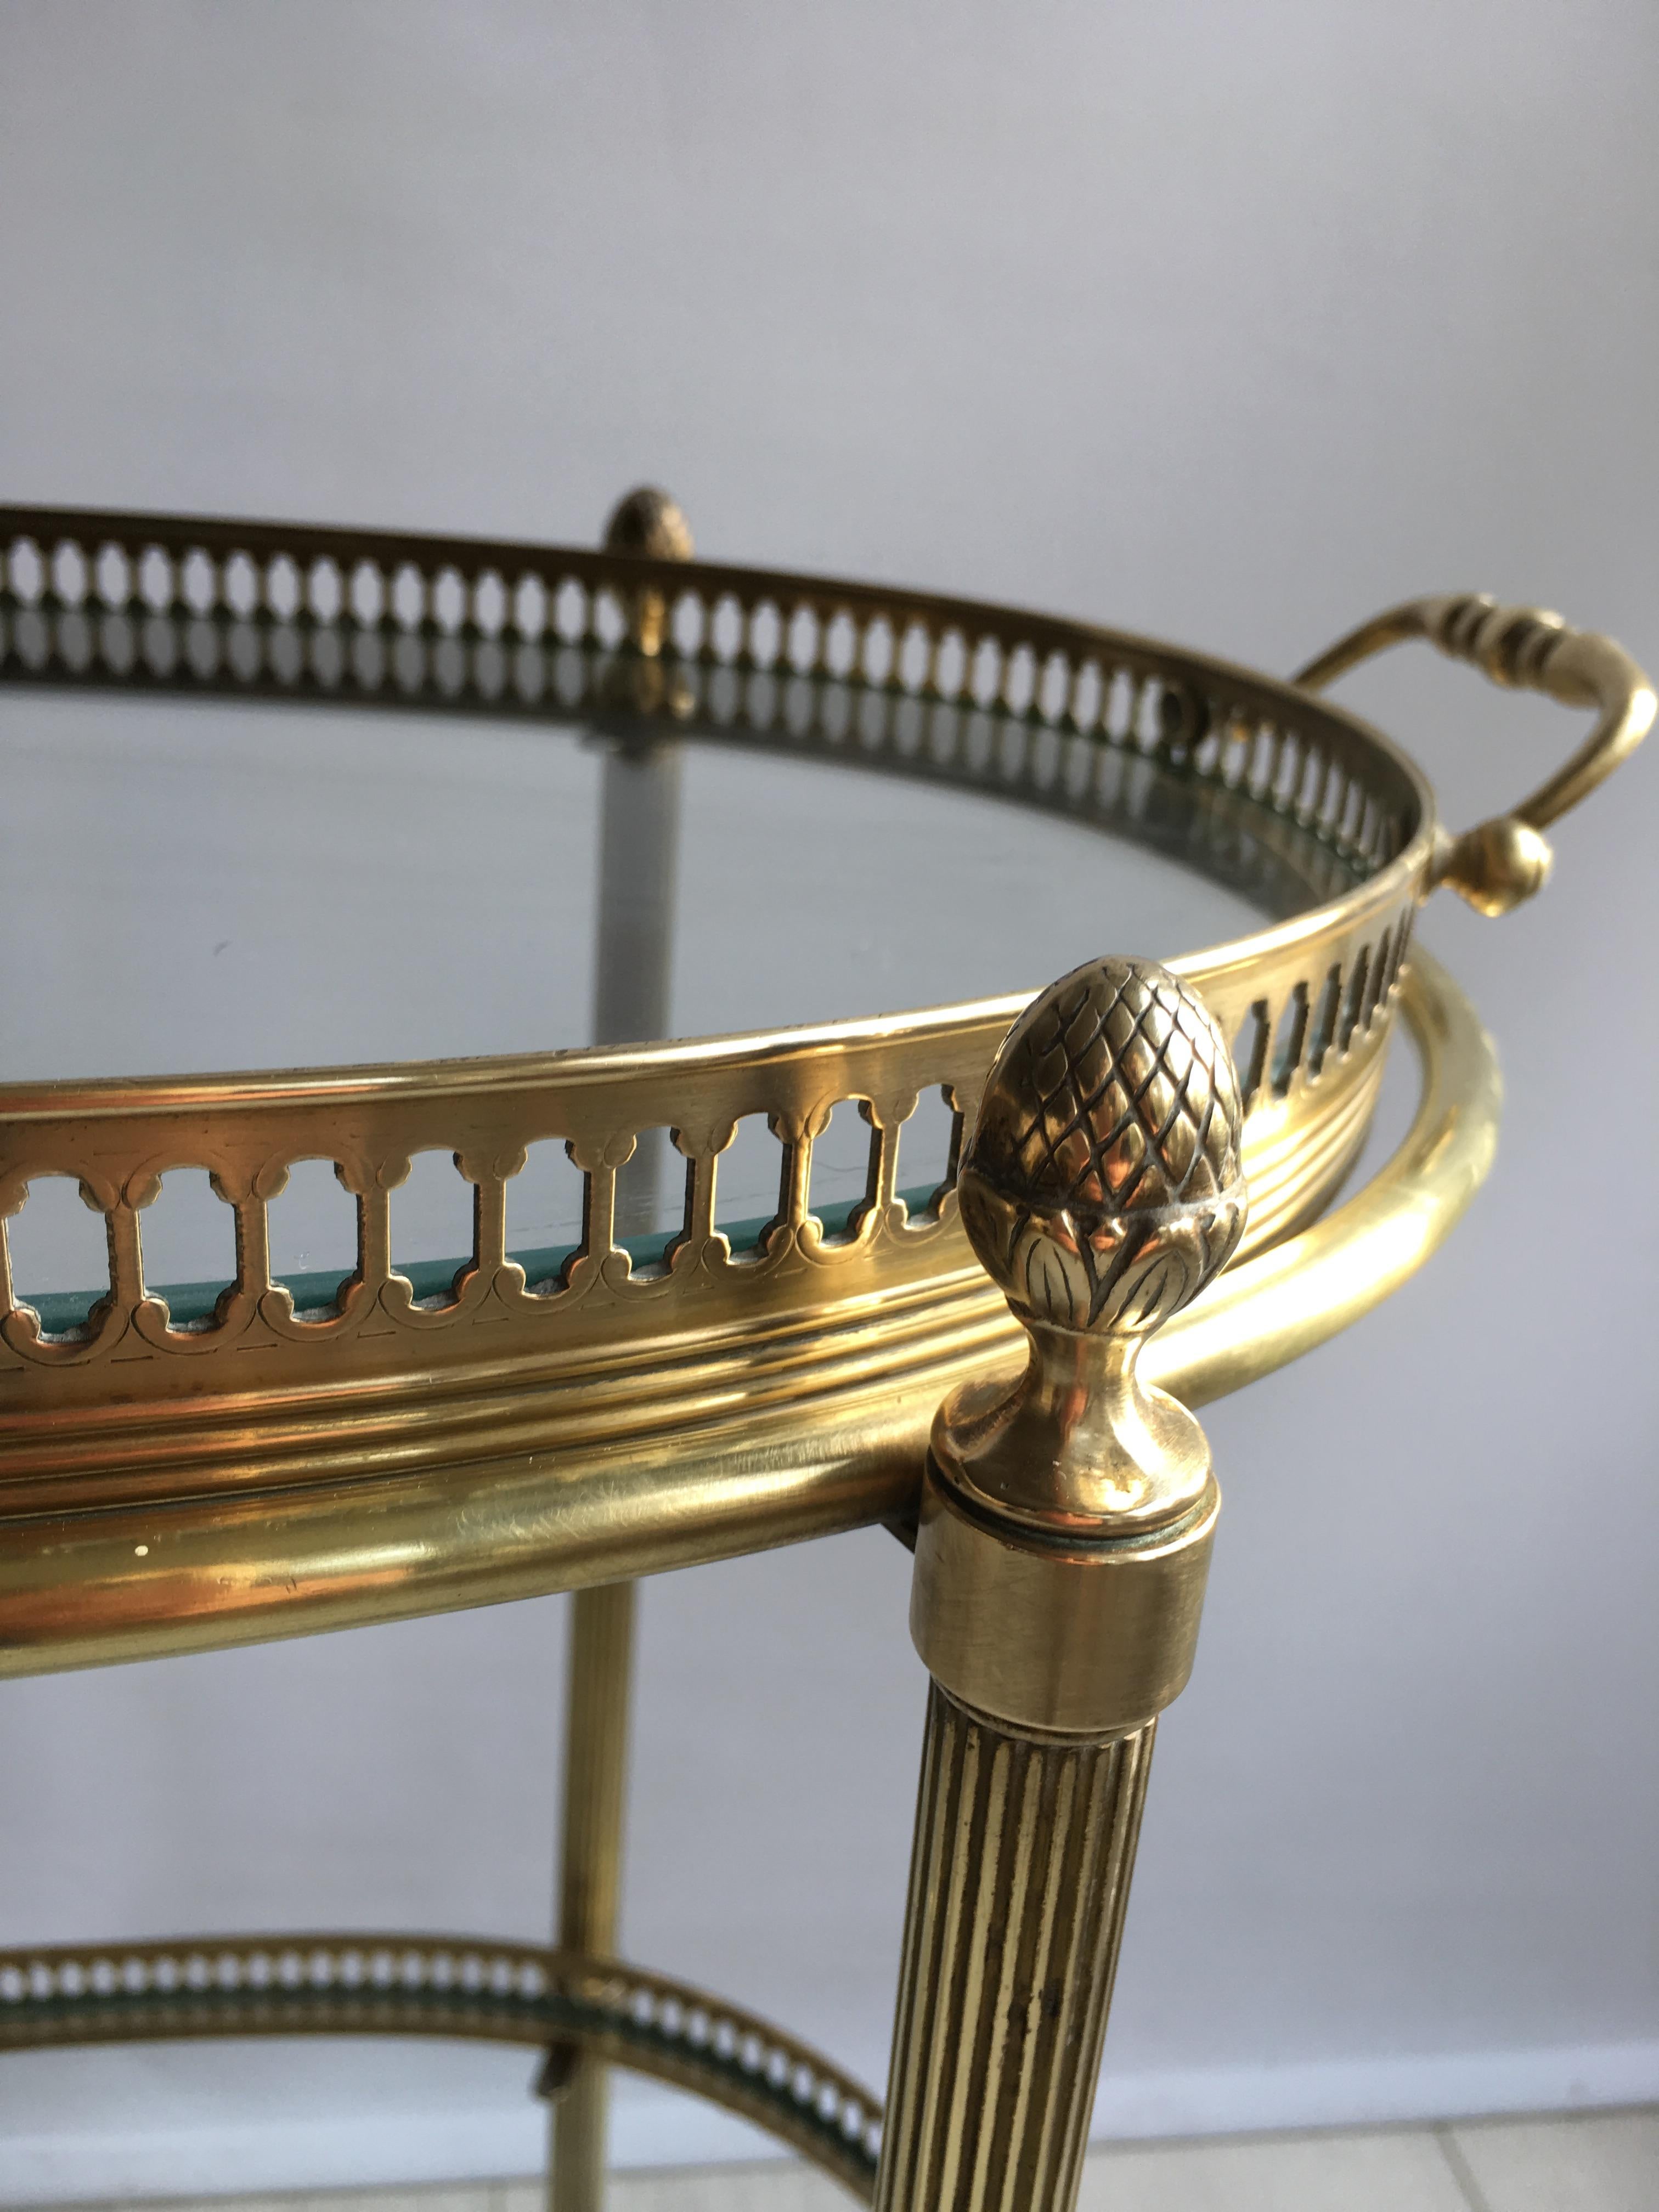 Mid-20th Century Vintage French Brass Oval Drinks Trolley or Bar Cart